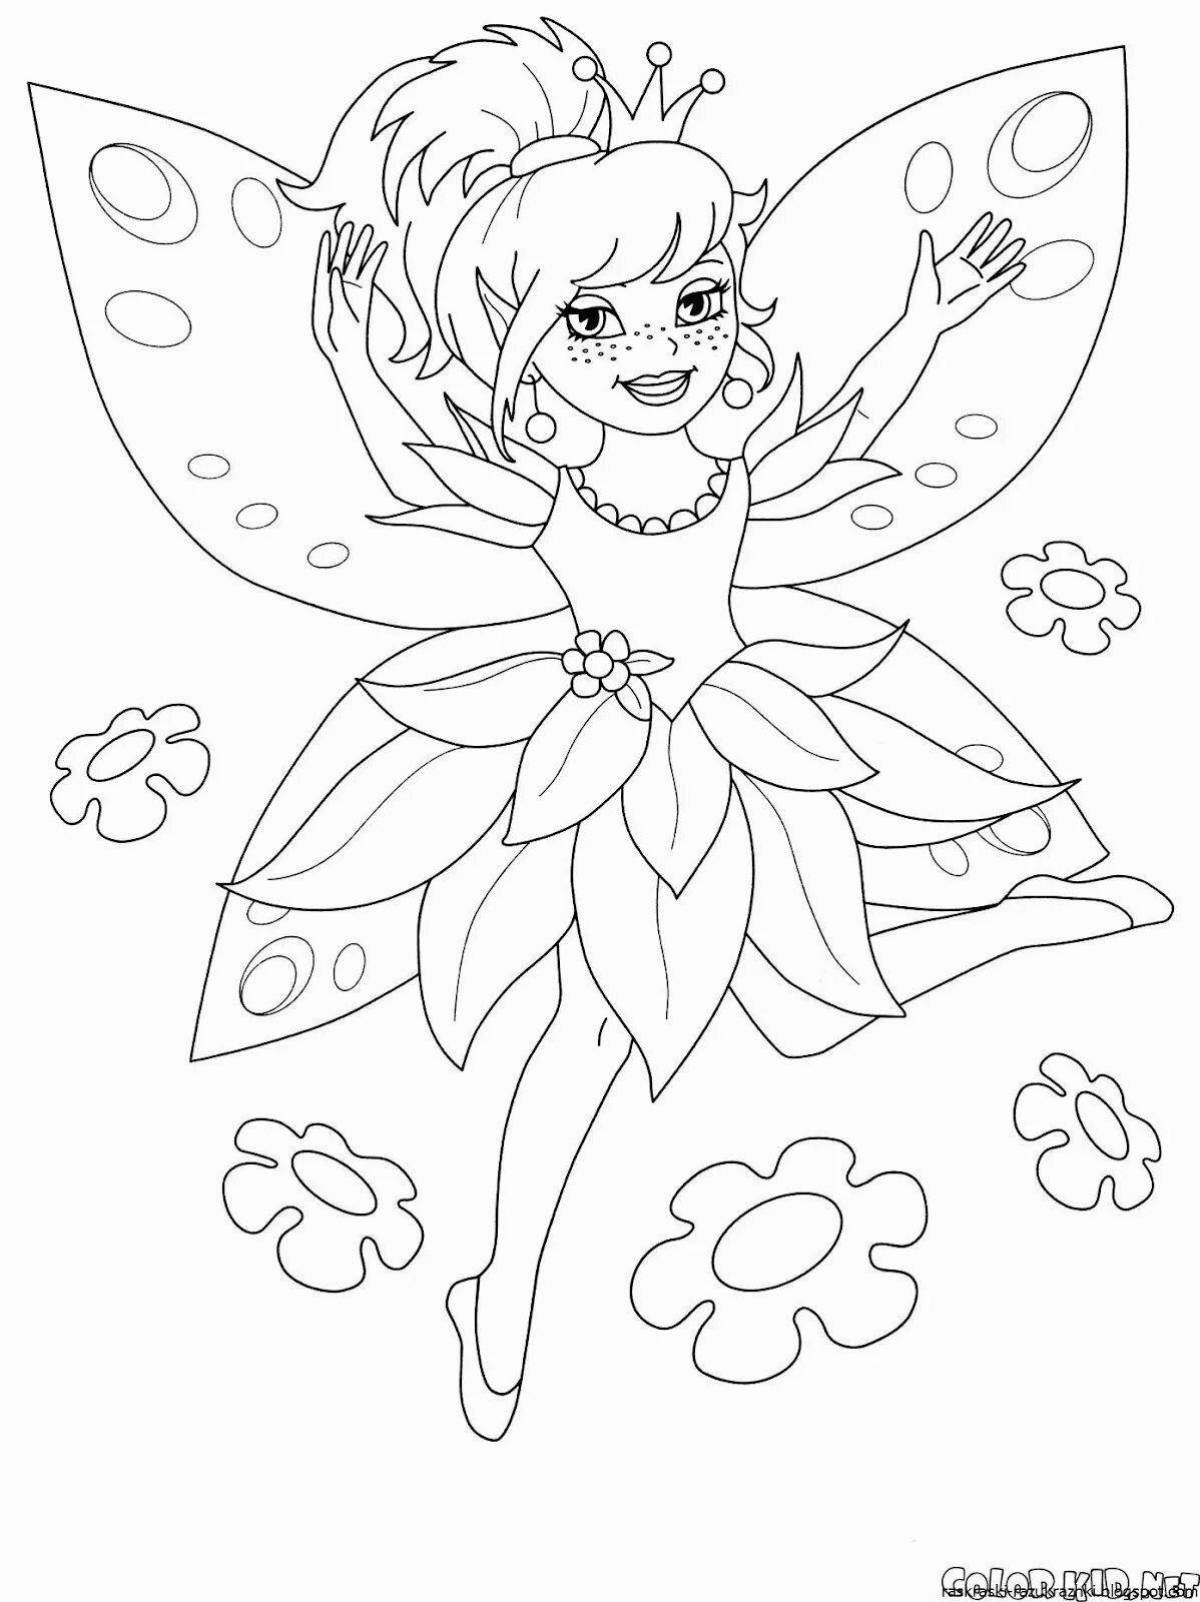 Fairy playful coloring book for 5-6 year olds